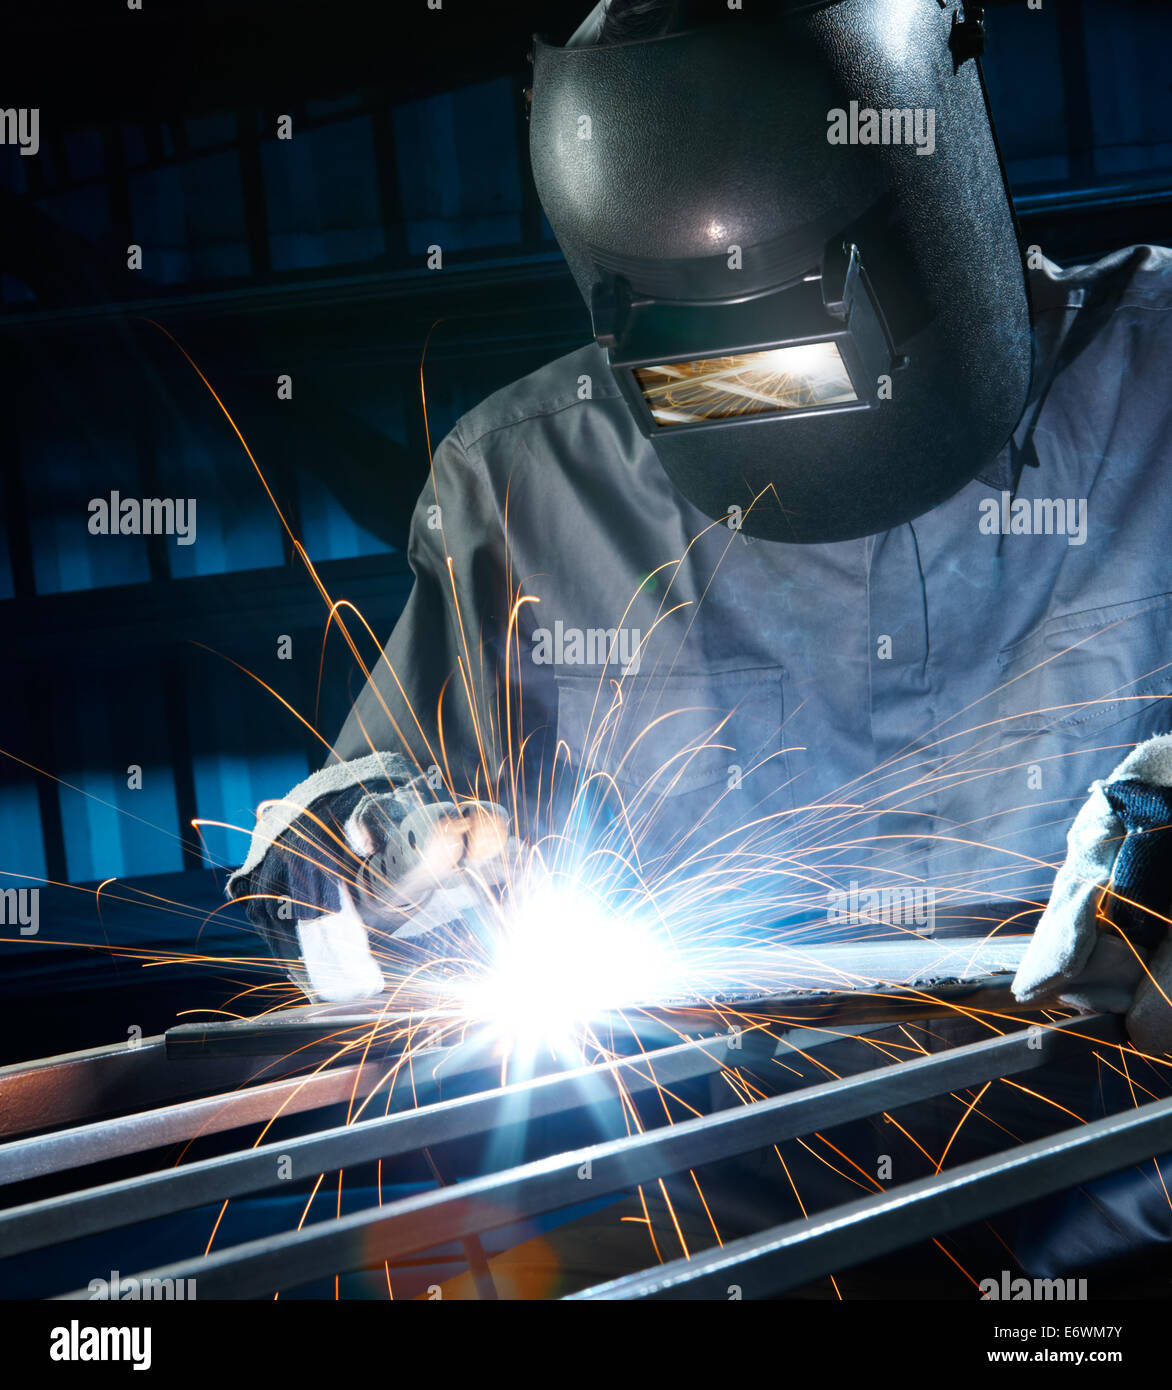 man welding with reflection of sparks on visor Stock Photo